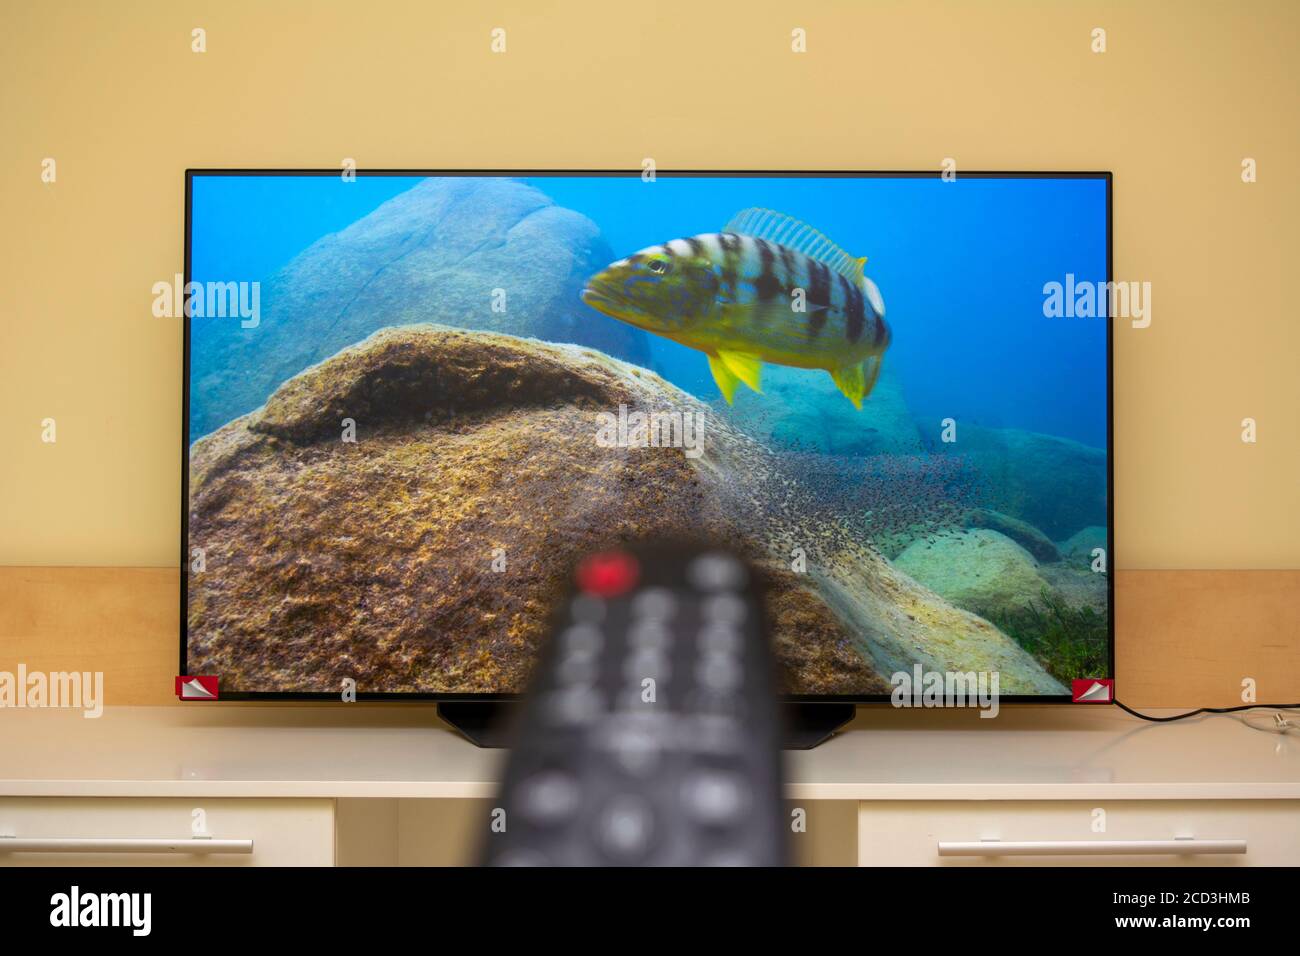 The new Uled tv technology that displays the black leds as pure black unlike the Oled tv Stock Photo